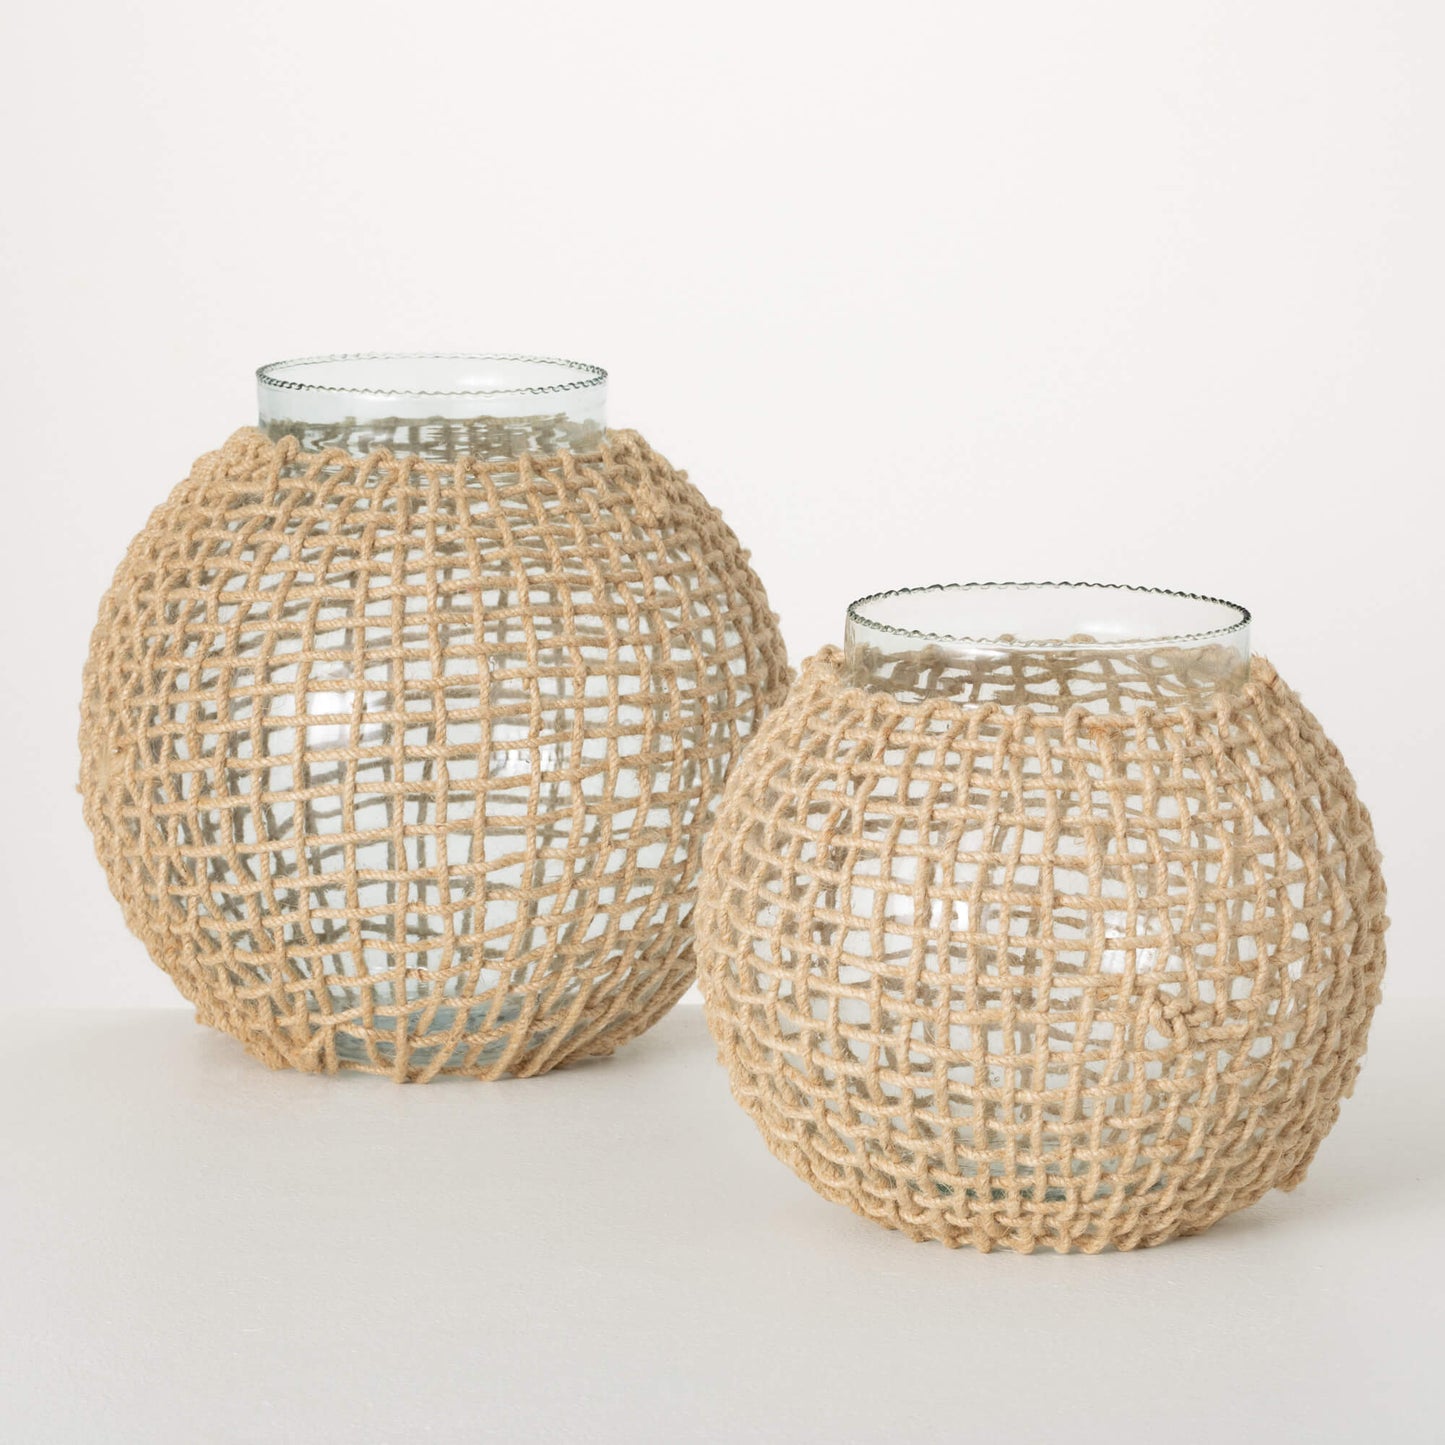 2 round glass vases with very short but wide neck openings wrapped in woven seagrass.